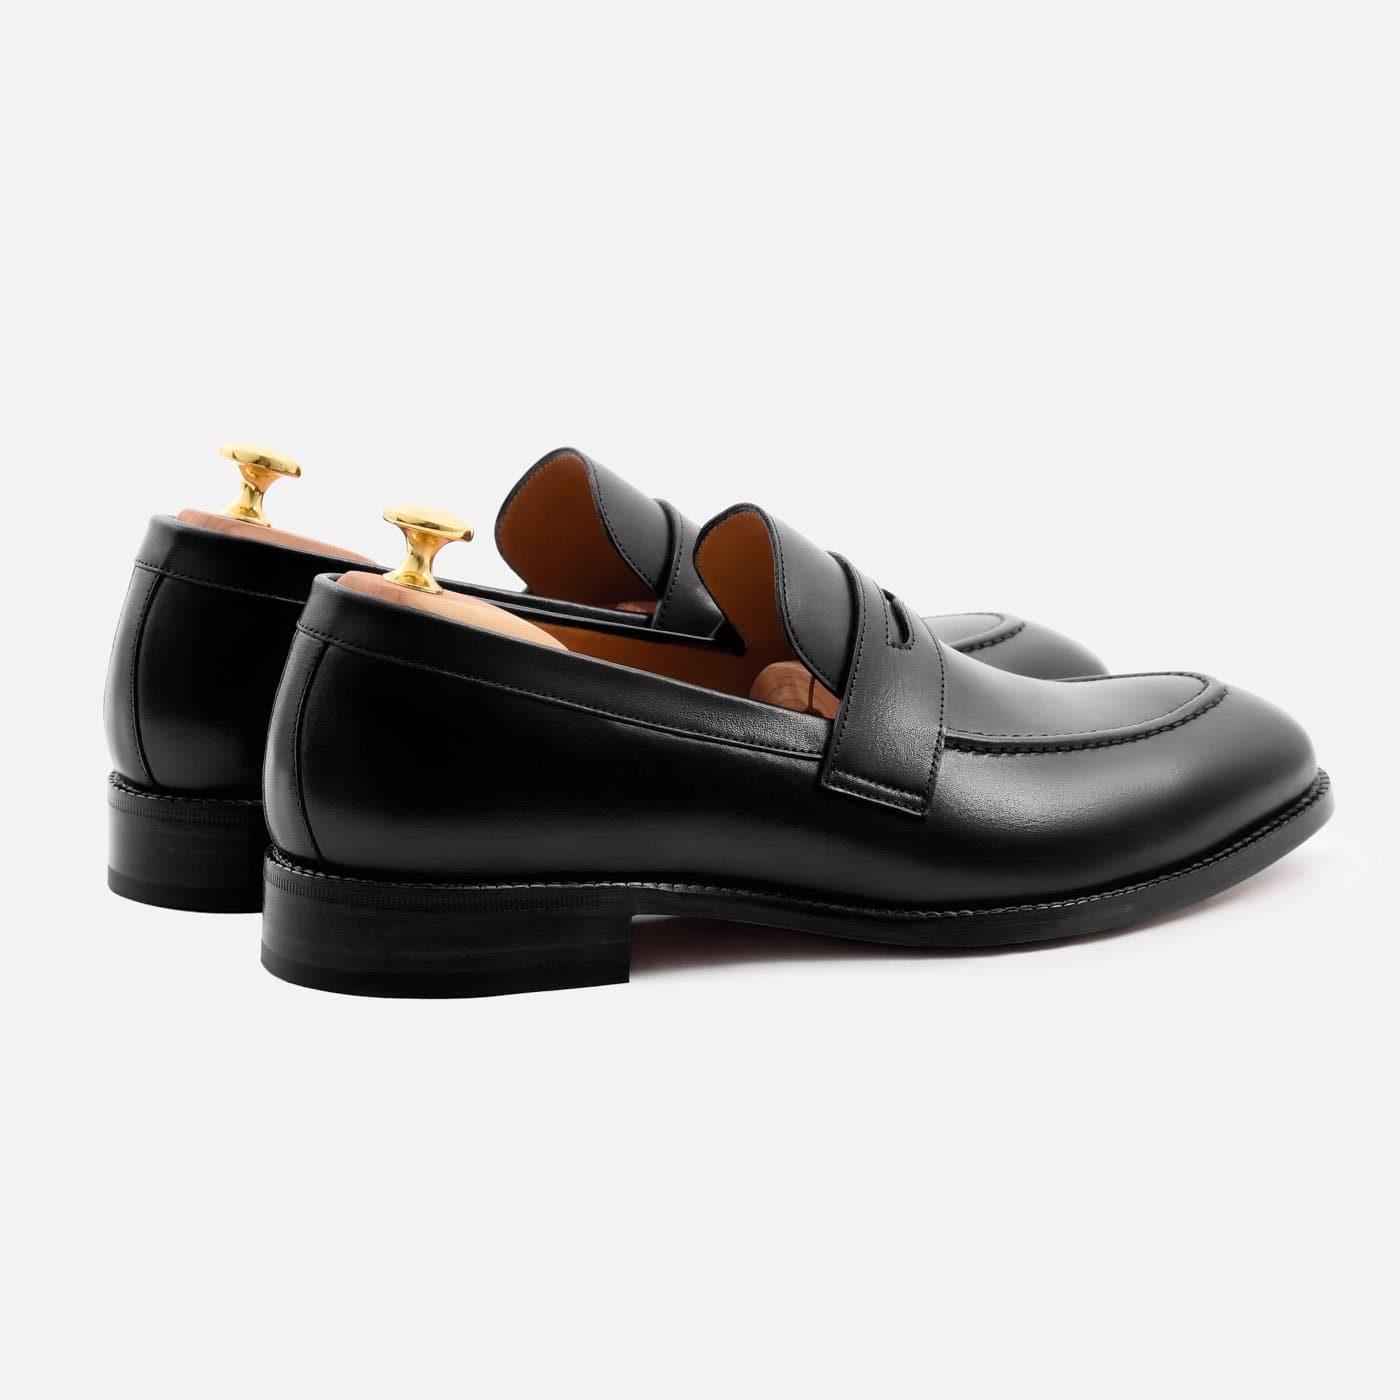 Loafers for Women - Buy Women Loafers Online in India | Metro Shoes